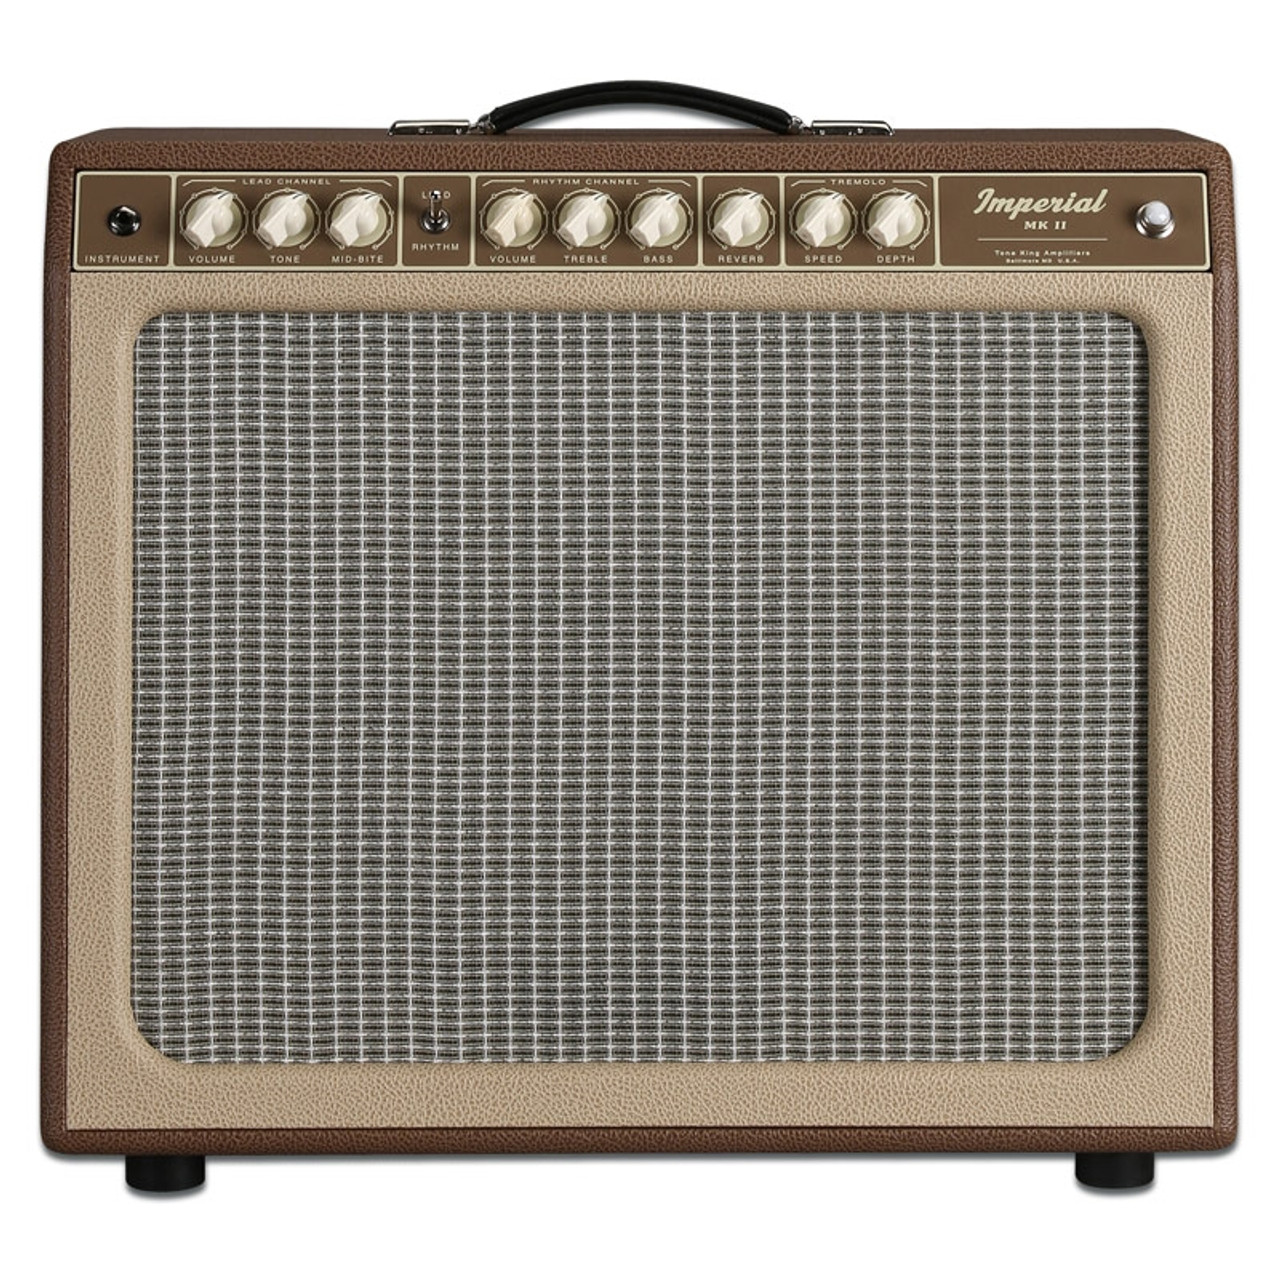 Tone King Imperial MK II Combo in Brown and Beige